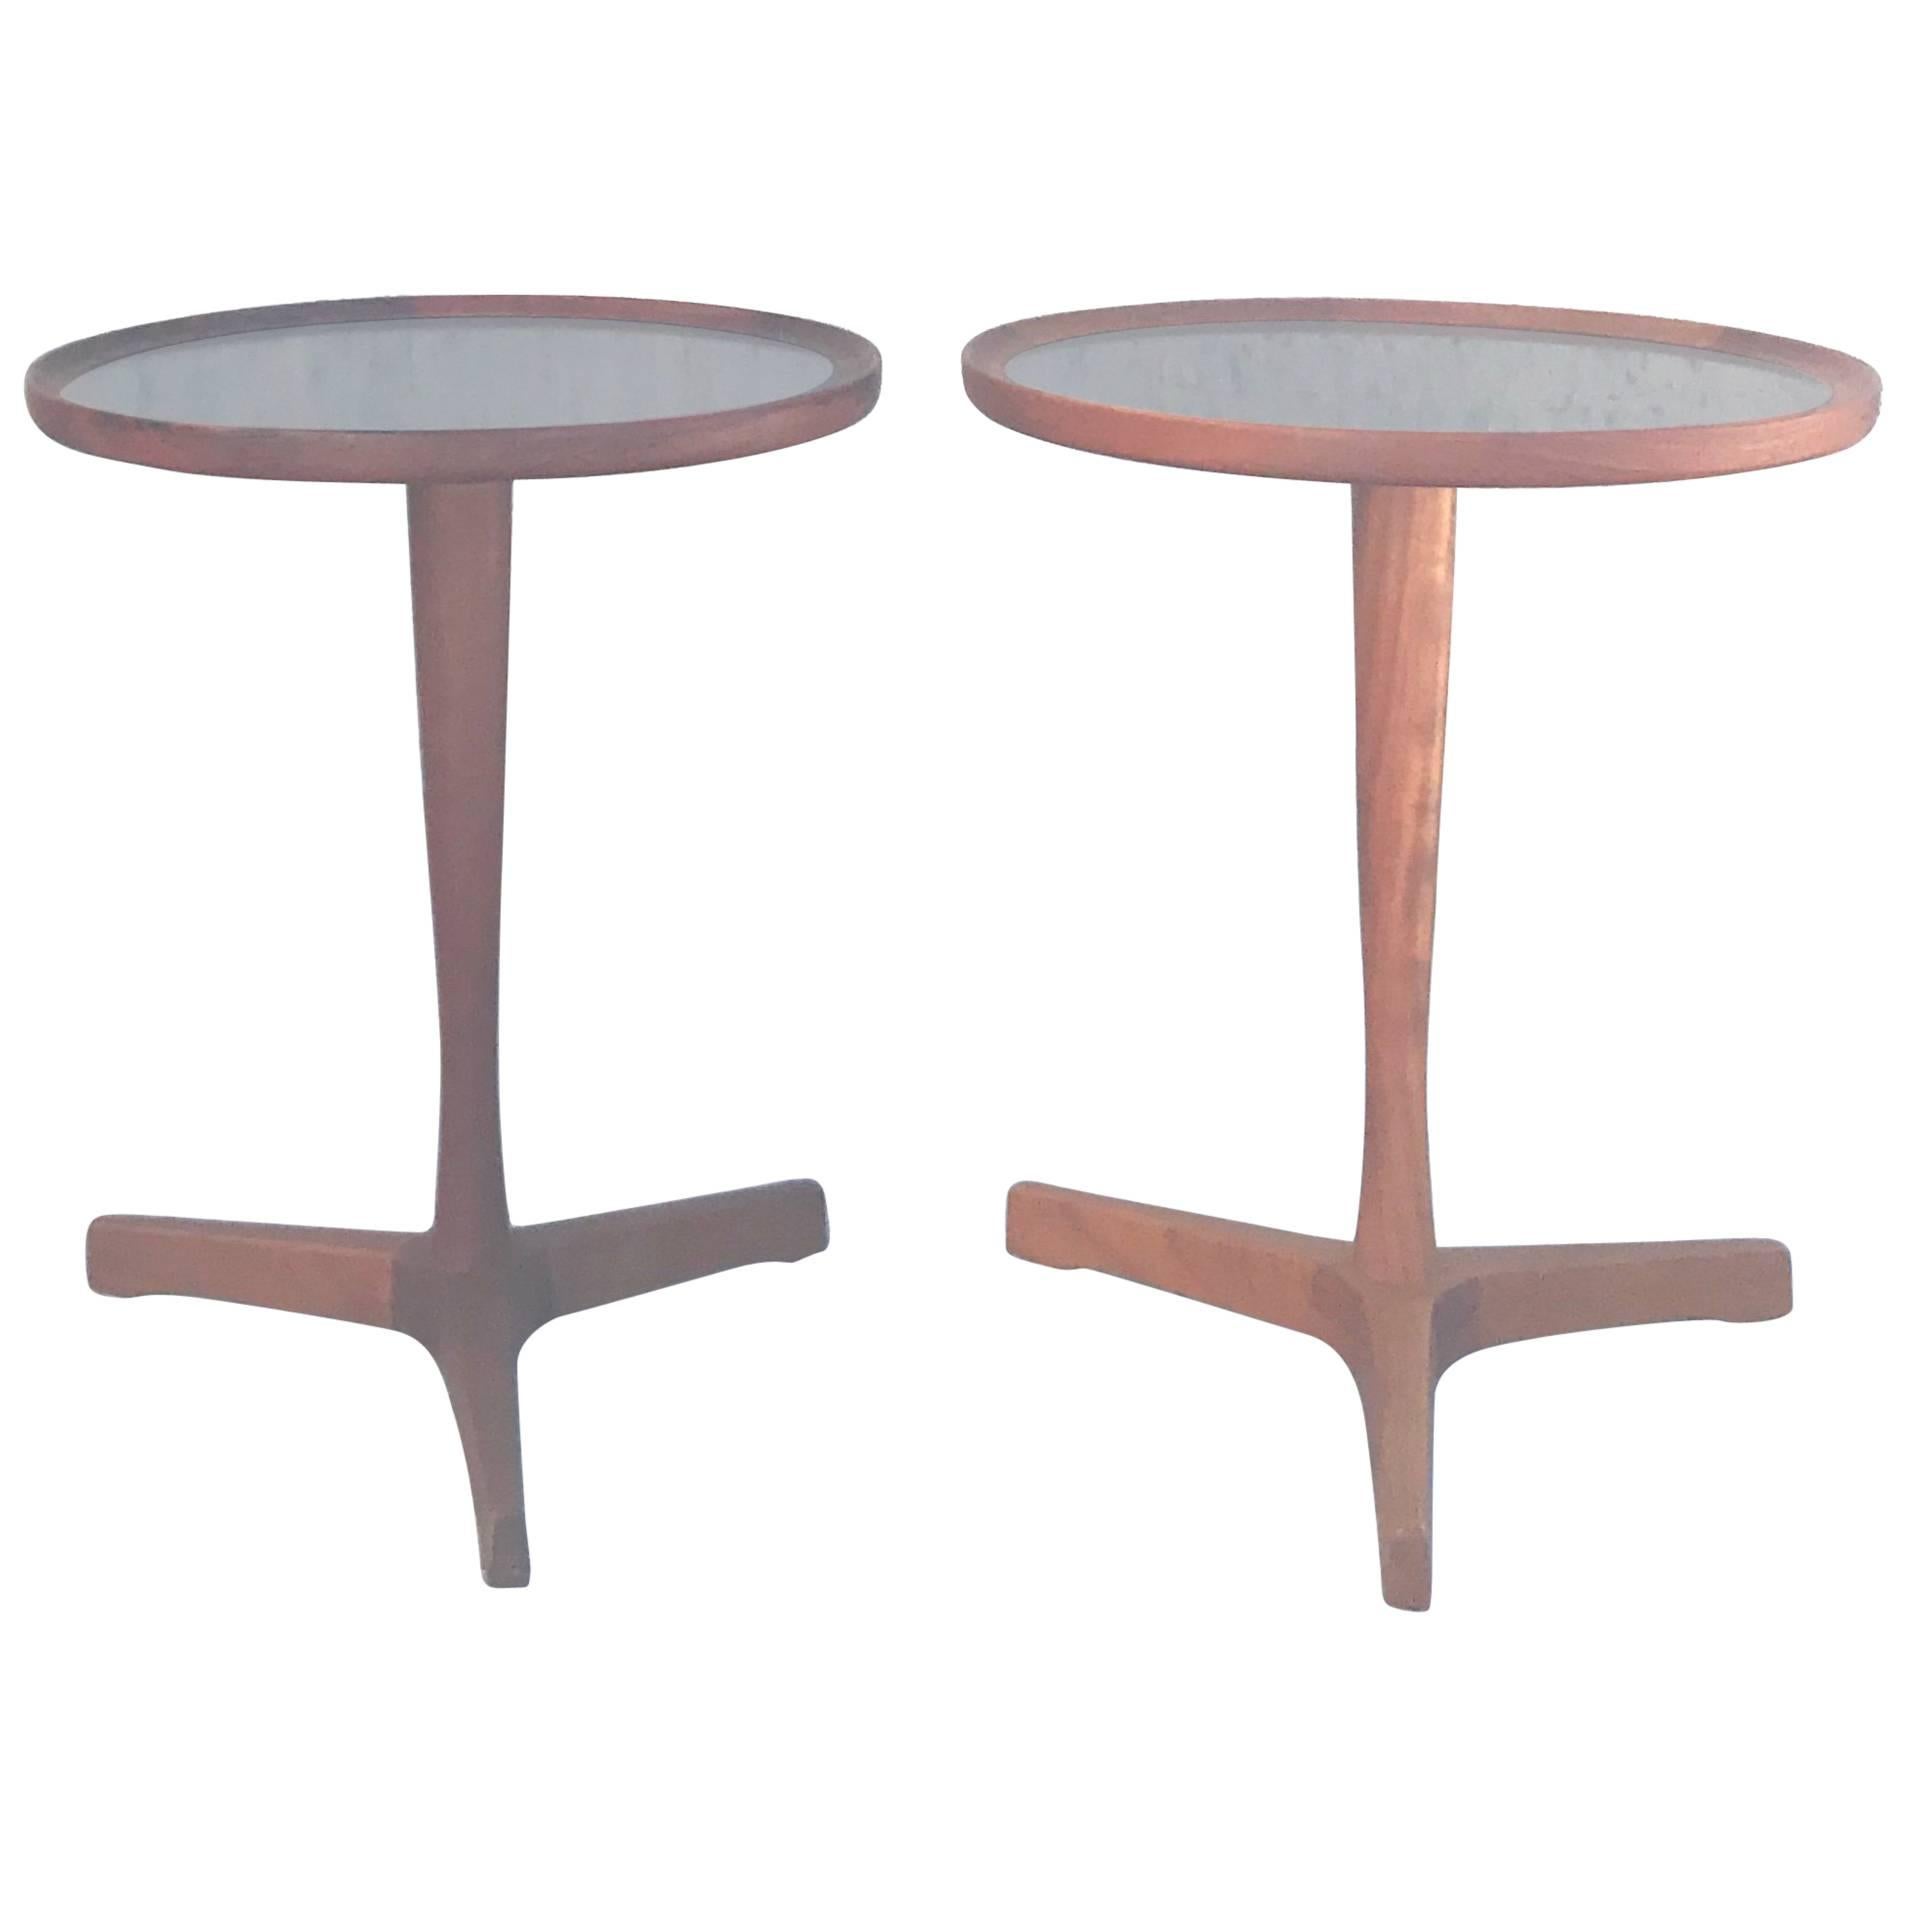 Chic pair of 1960s Danish Modern drinks tables designed by Hans Andersen, constructed of teak wood with black laminate inset tops.